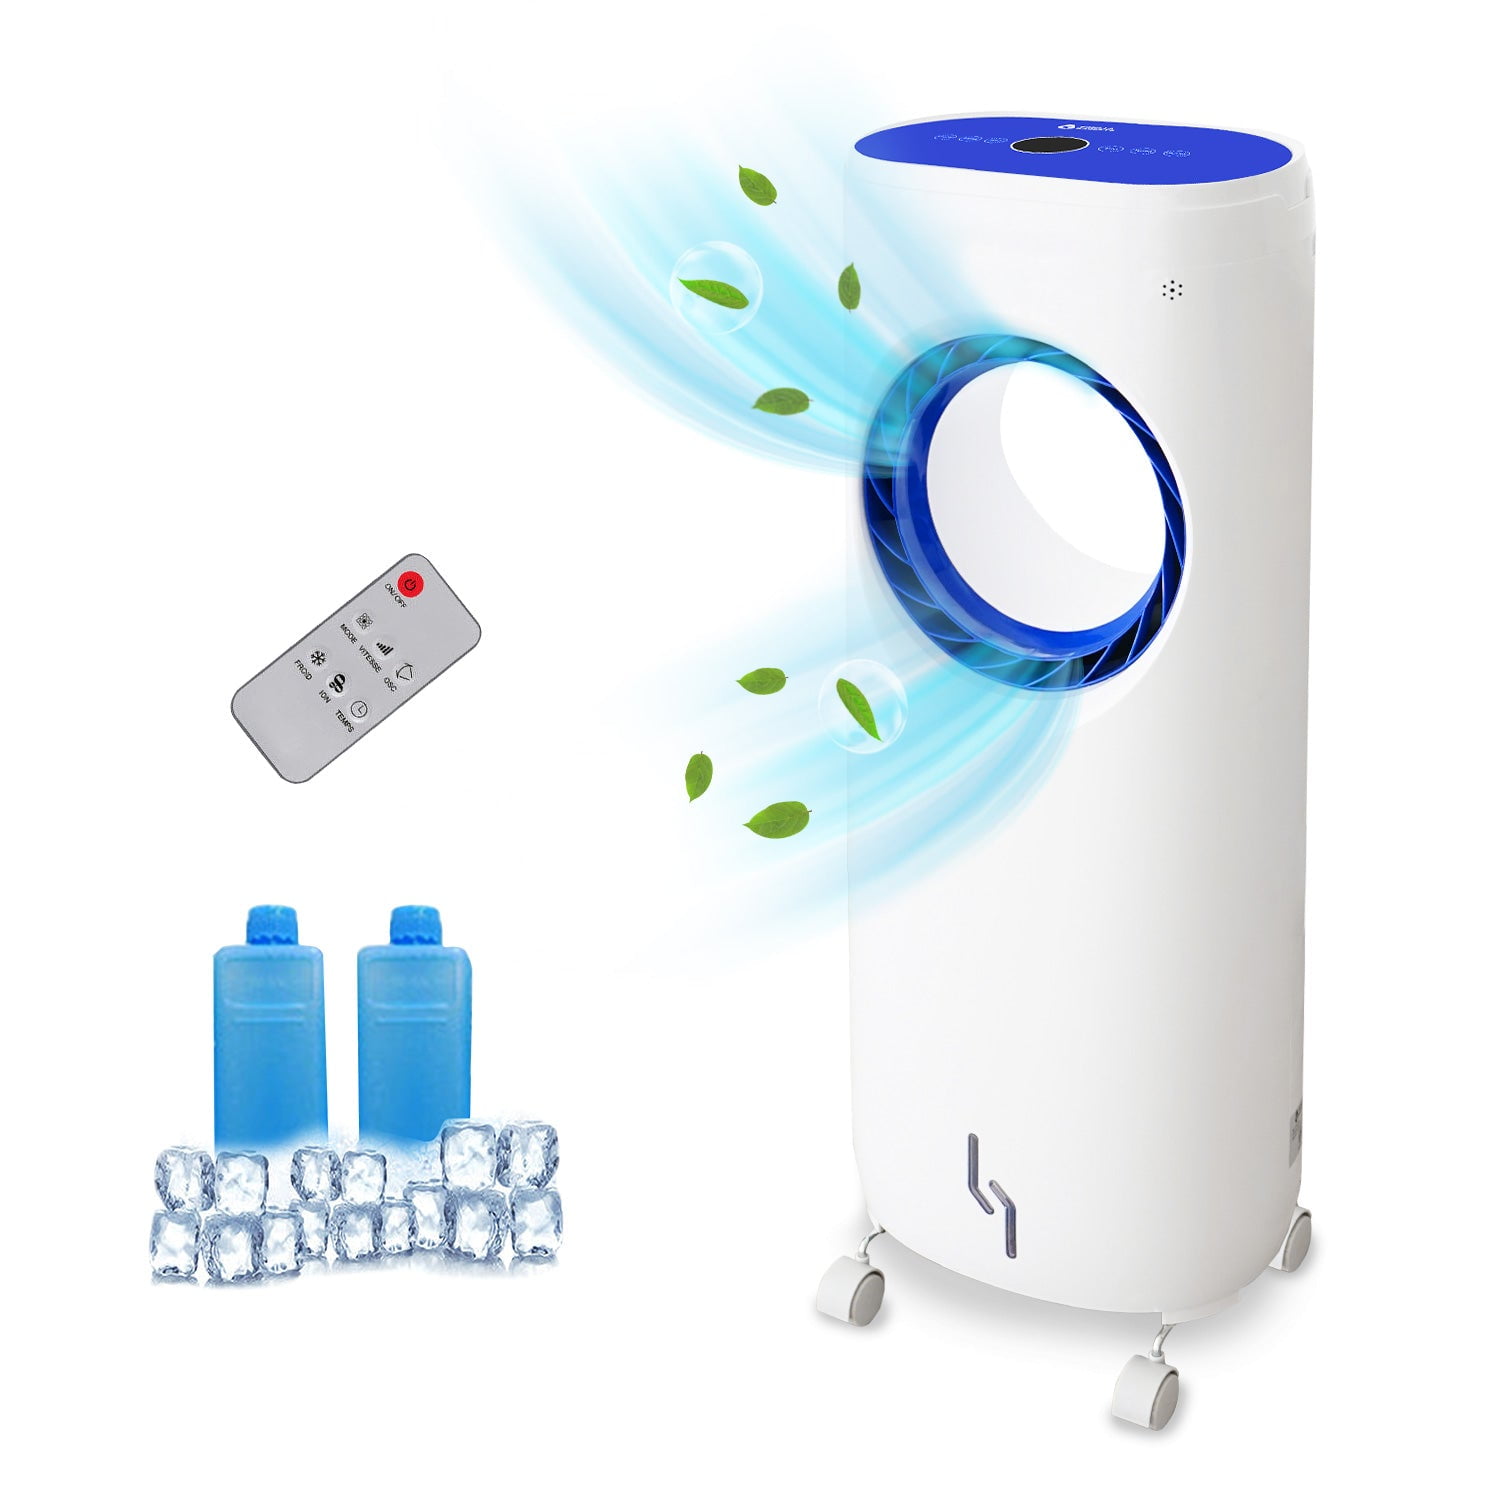 Details about   Evaporative Portable Air Conditioner Cooler Tower Fan Indoor with Remote Control 